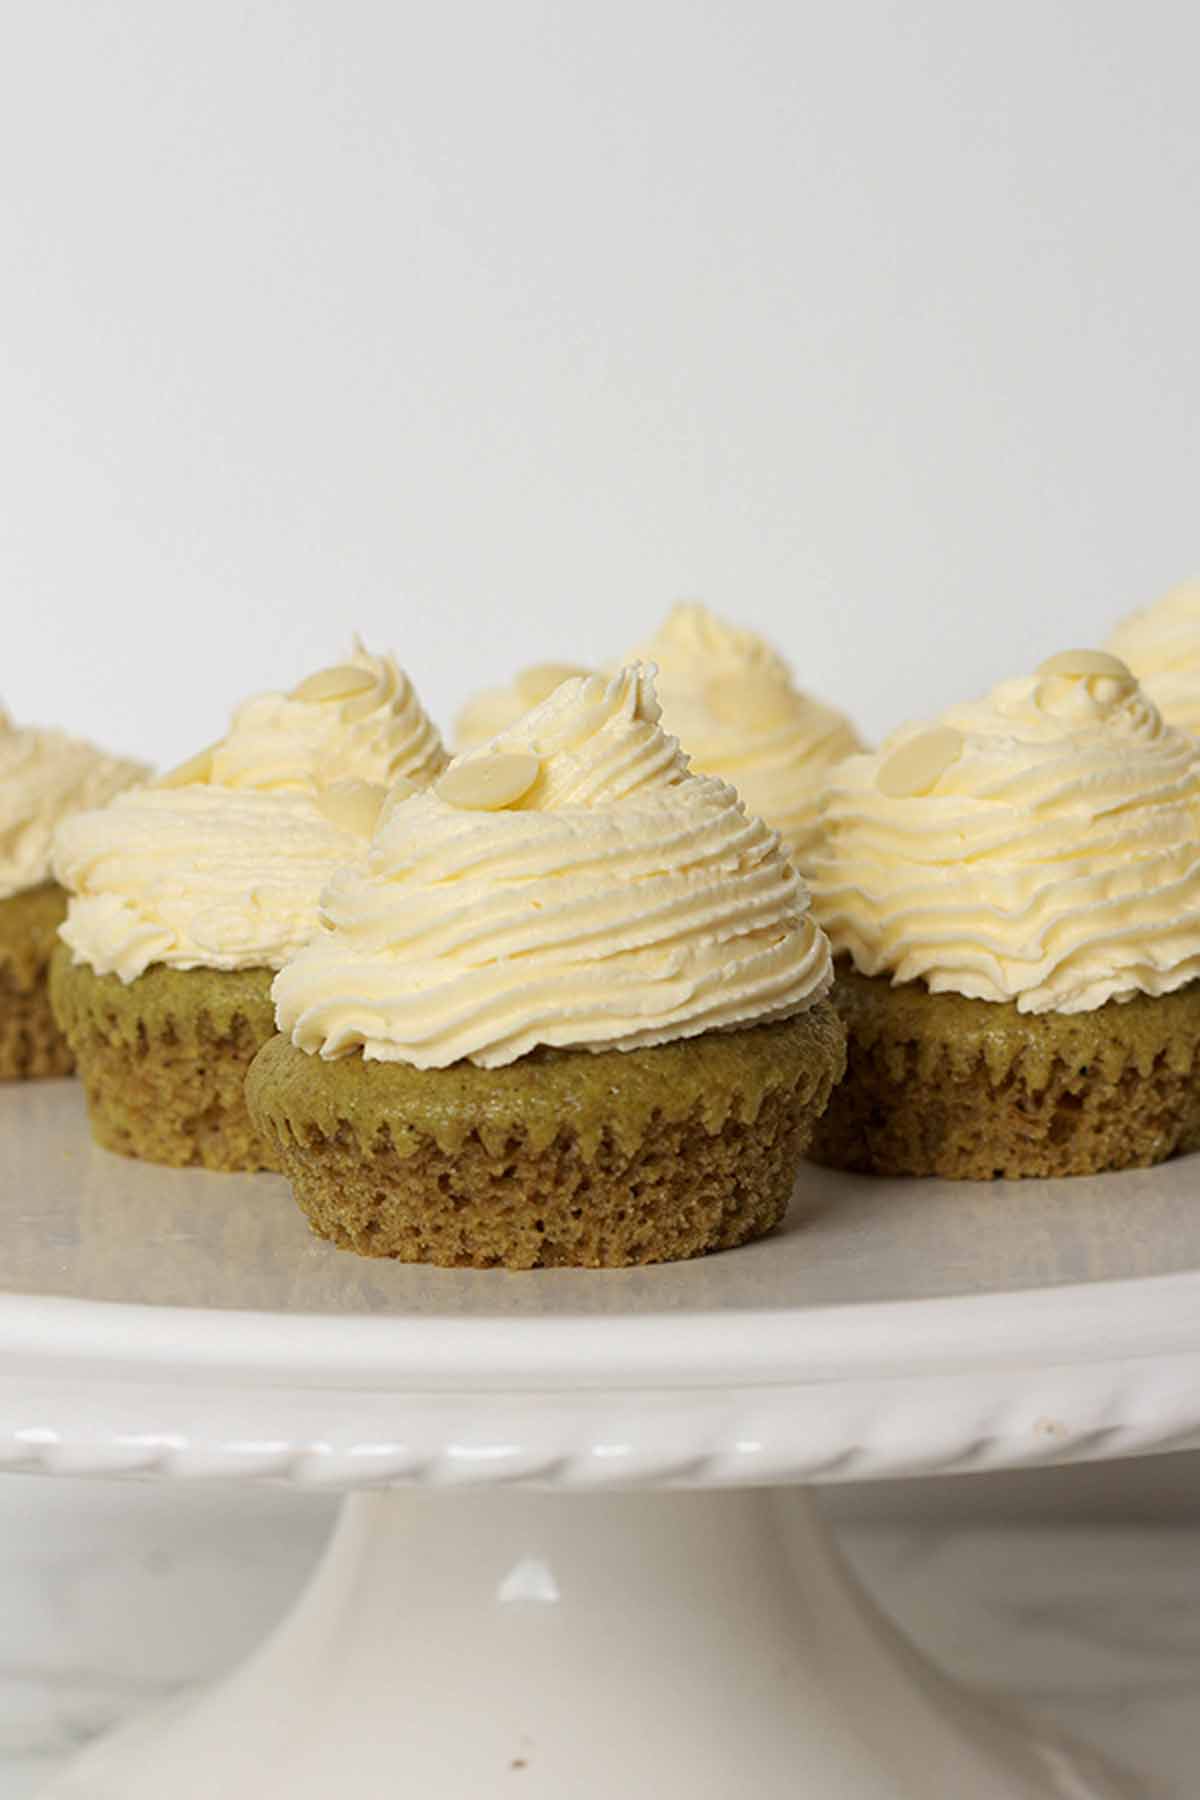 White Chocolate Buttercream Piped Onto Matcha Cupcakes